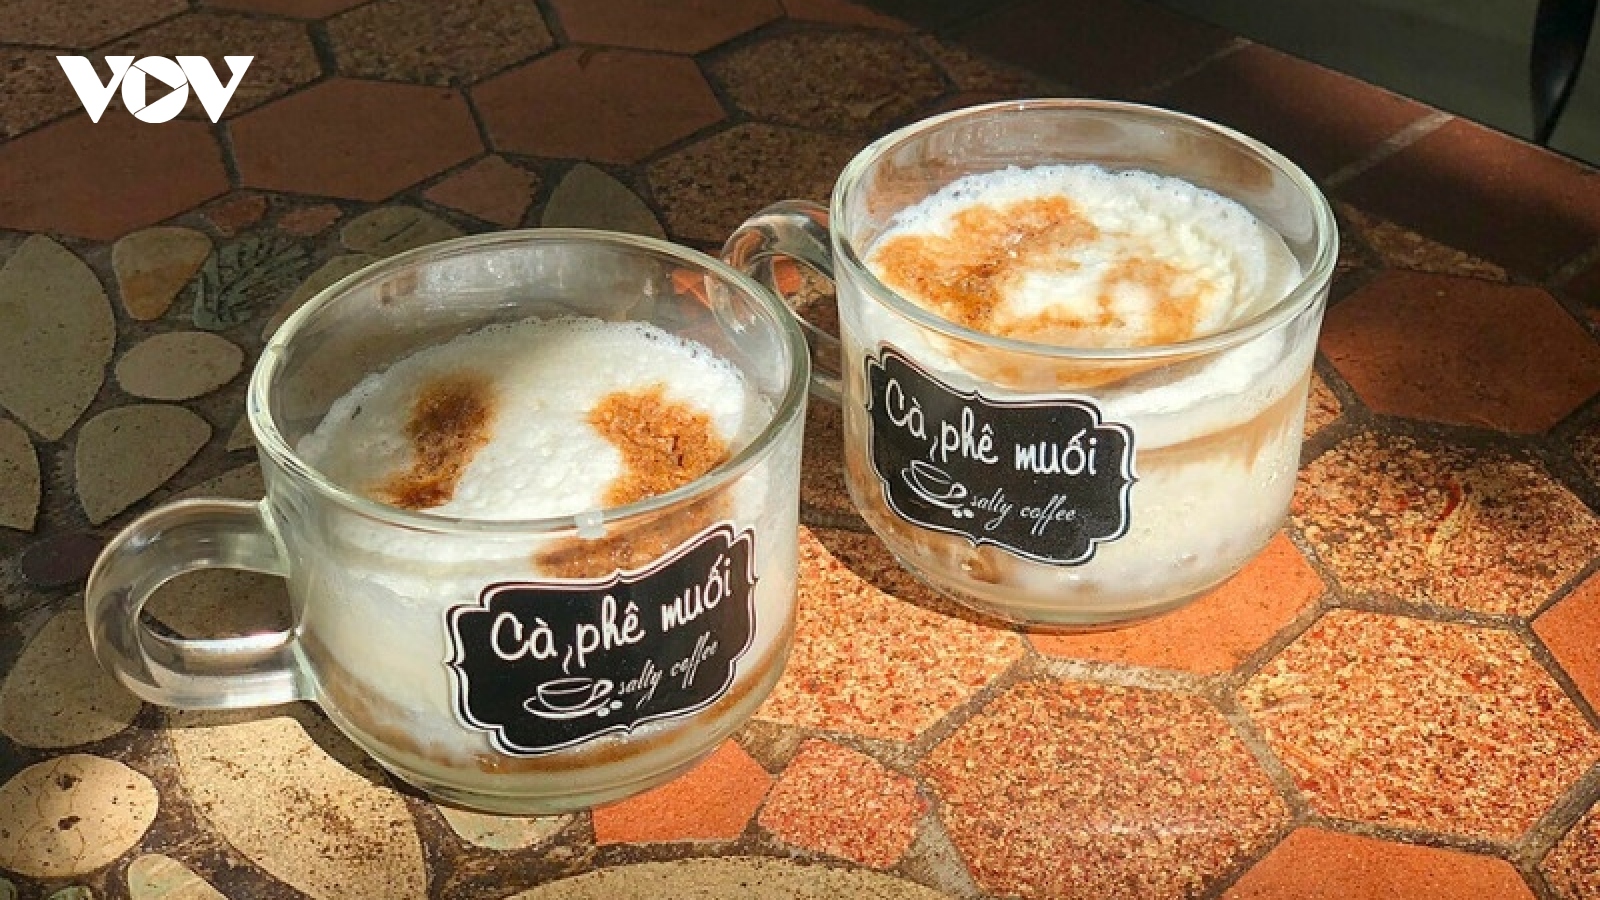 CNN assesses rise in popularity of Vietnamese salty coffee